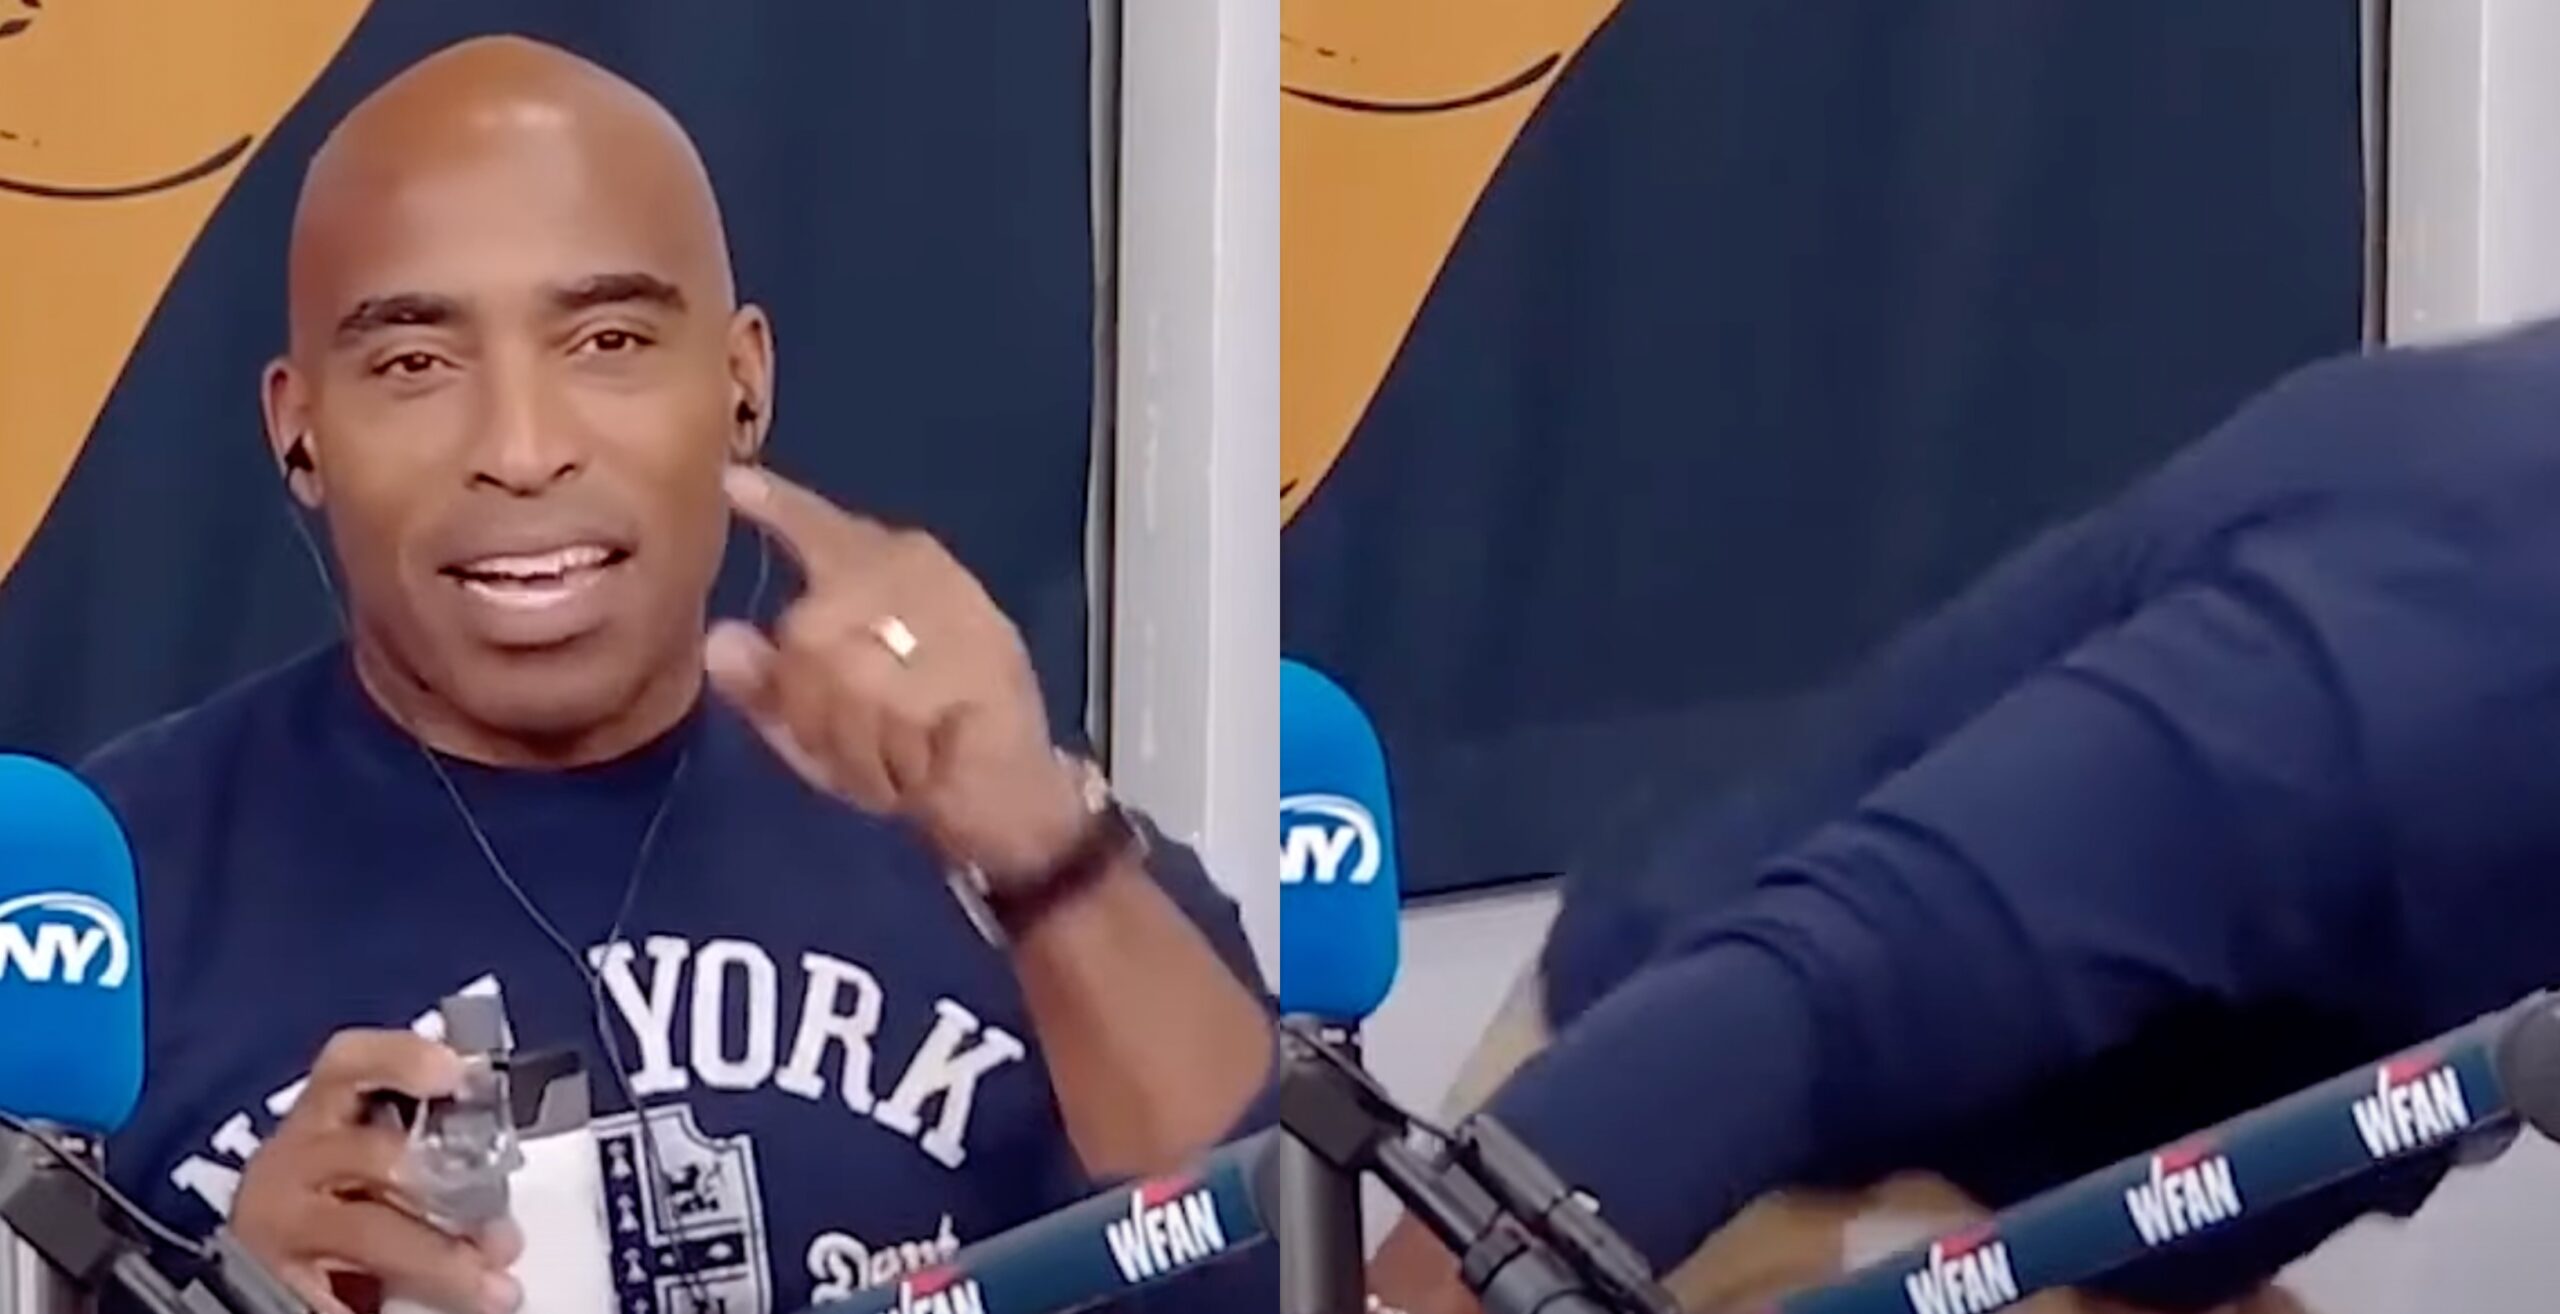 Ex-Giants RB Tiki Barber has a ridiculous take on NY Jets QB Zach Wilson